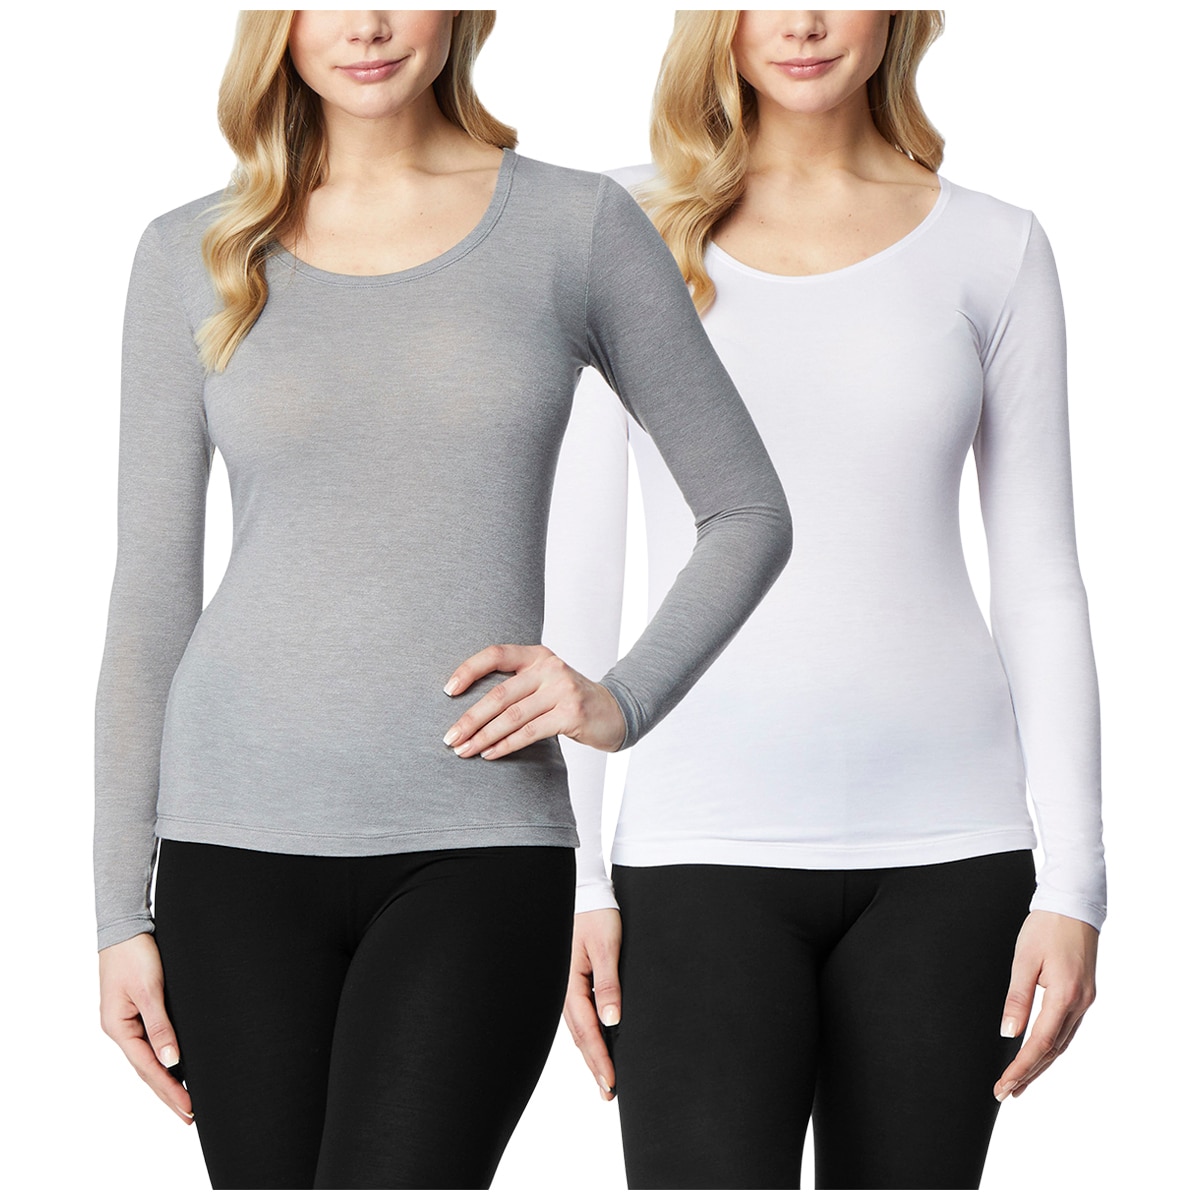 32 Degrees Heat 2-PACK Women's Base Layer Long Sleeve Tops White Grey XL 